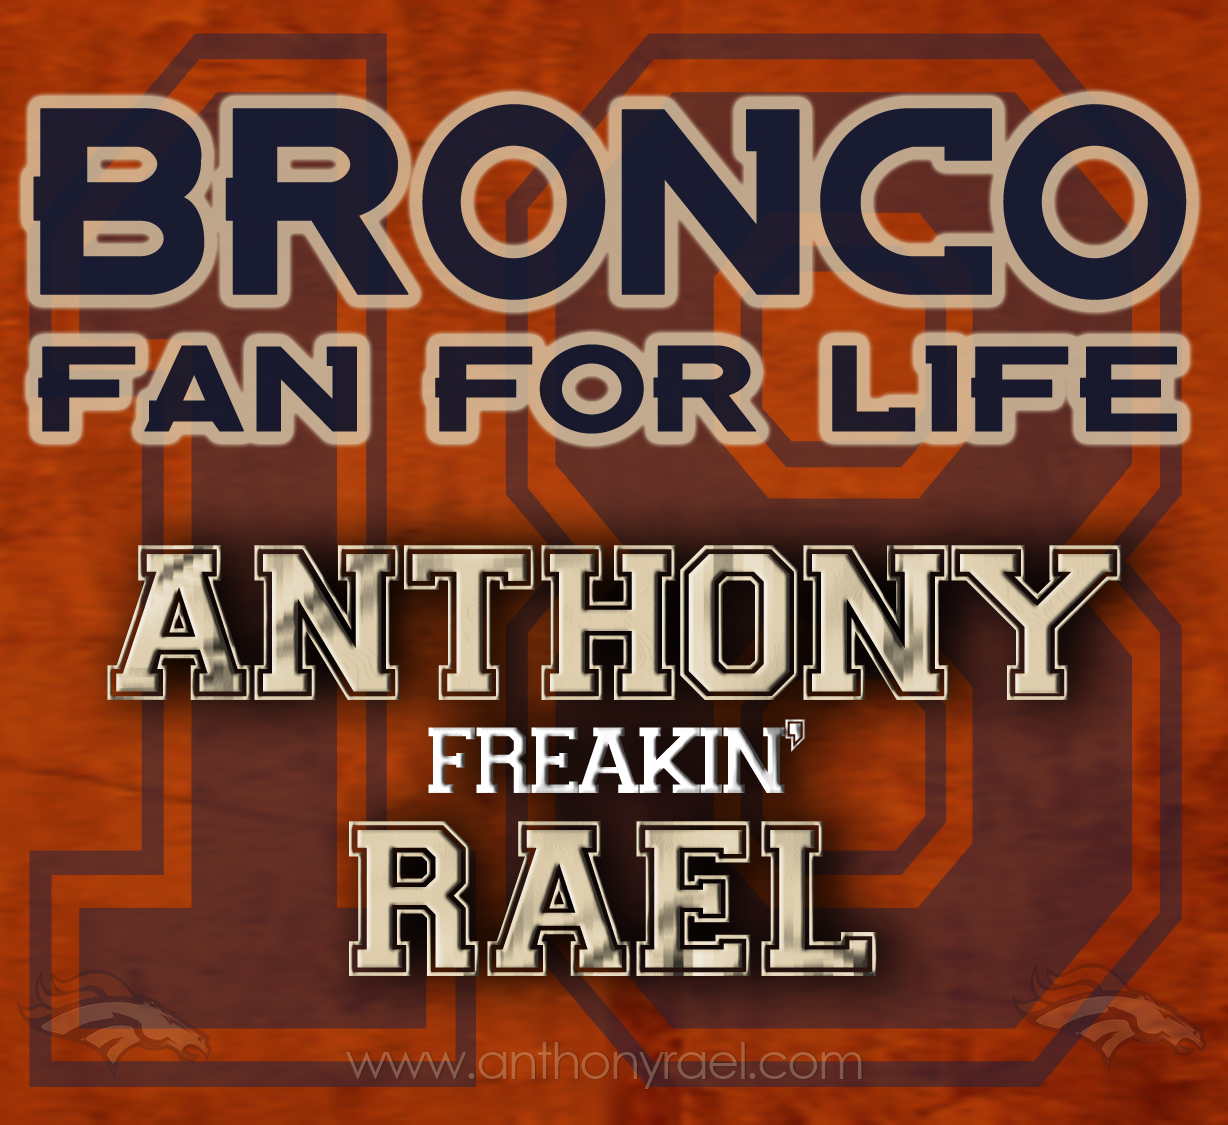 Bronco Fan for Liife - Anthony Rael